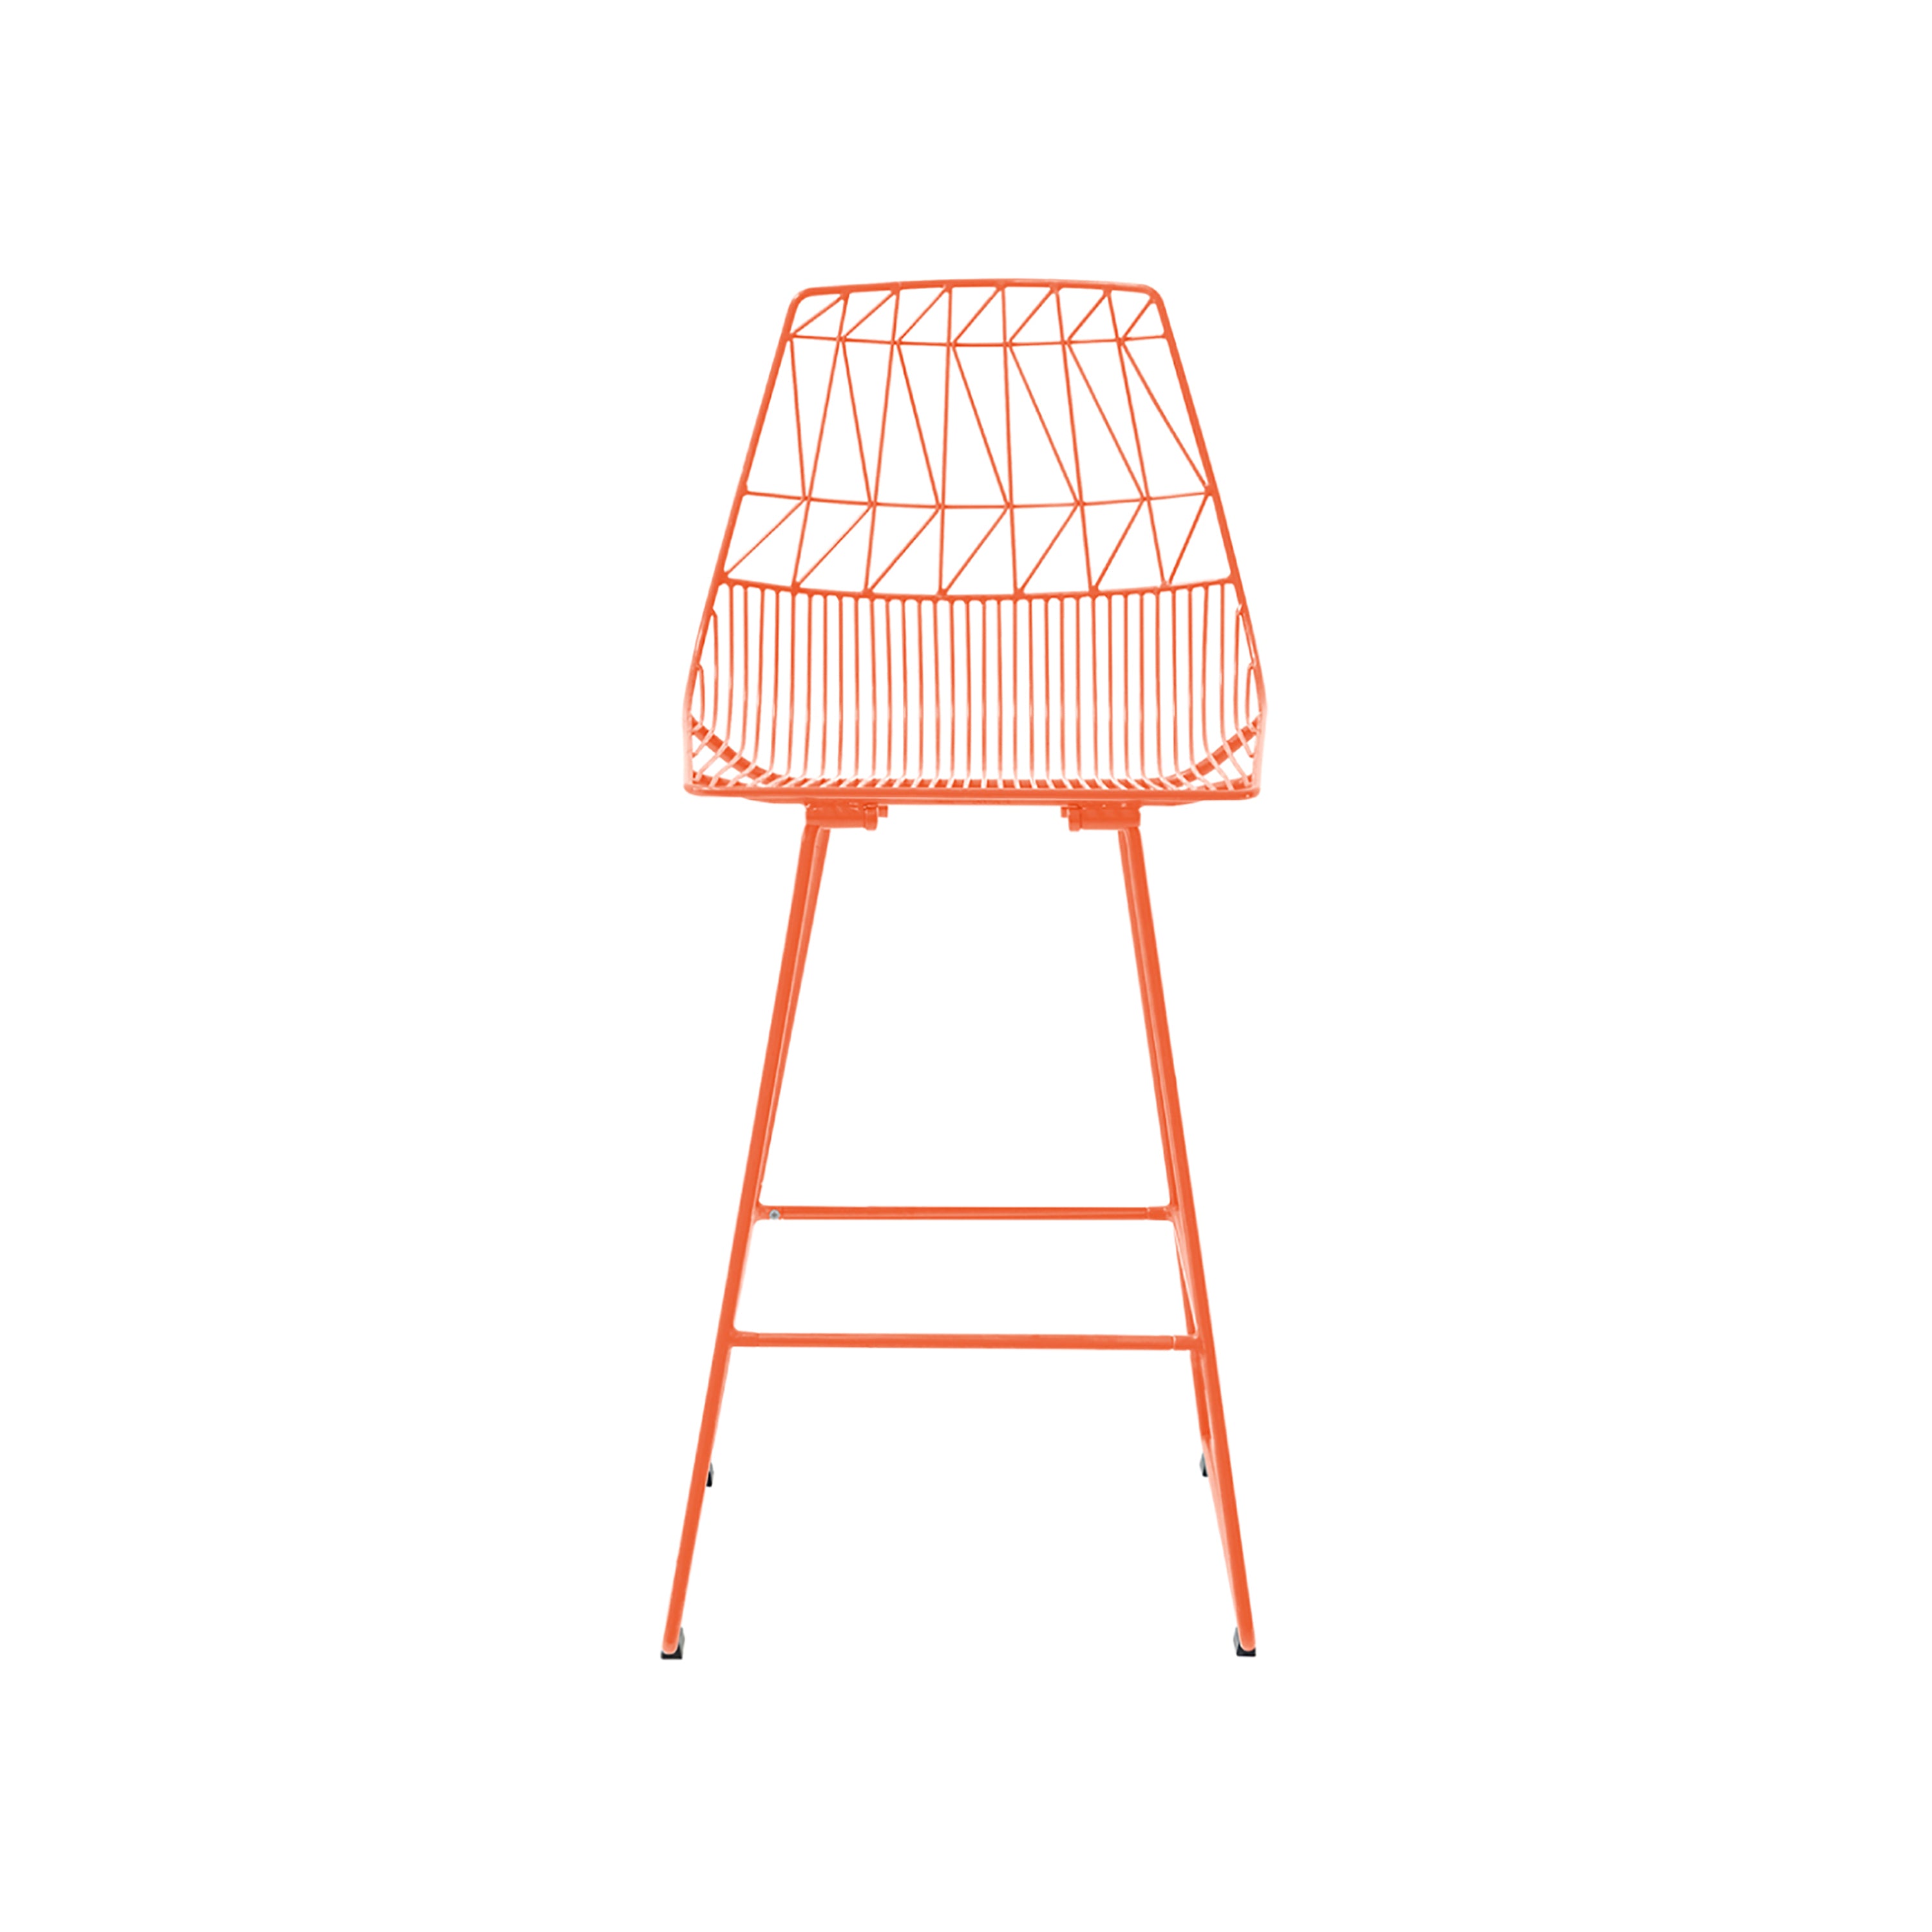 Lucy Bar + Counter Stool: Color + Counter + Orange + Without Seat Pad